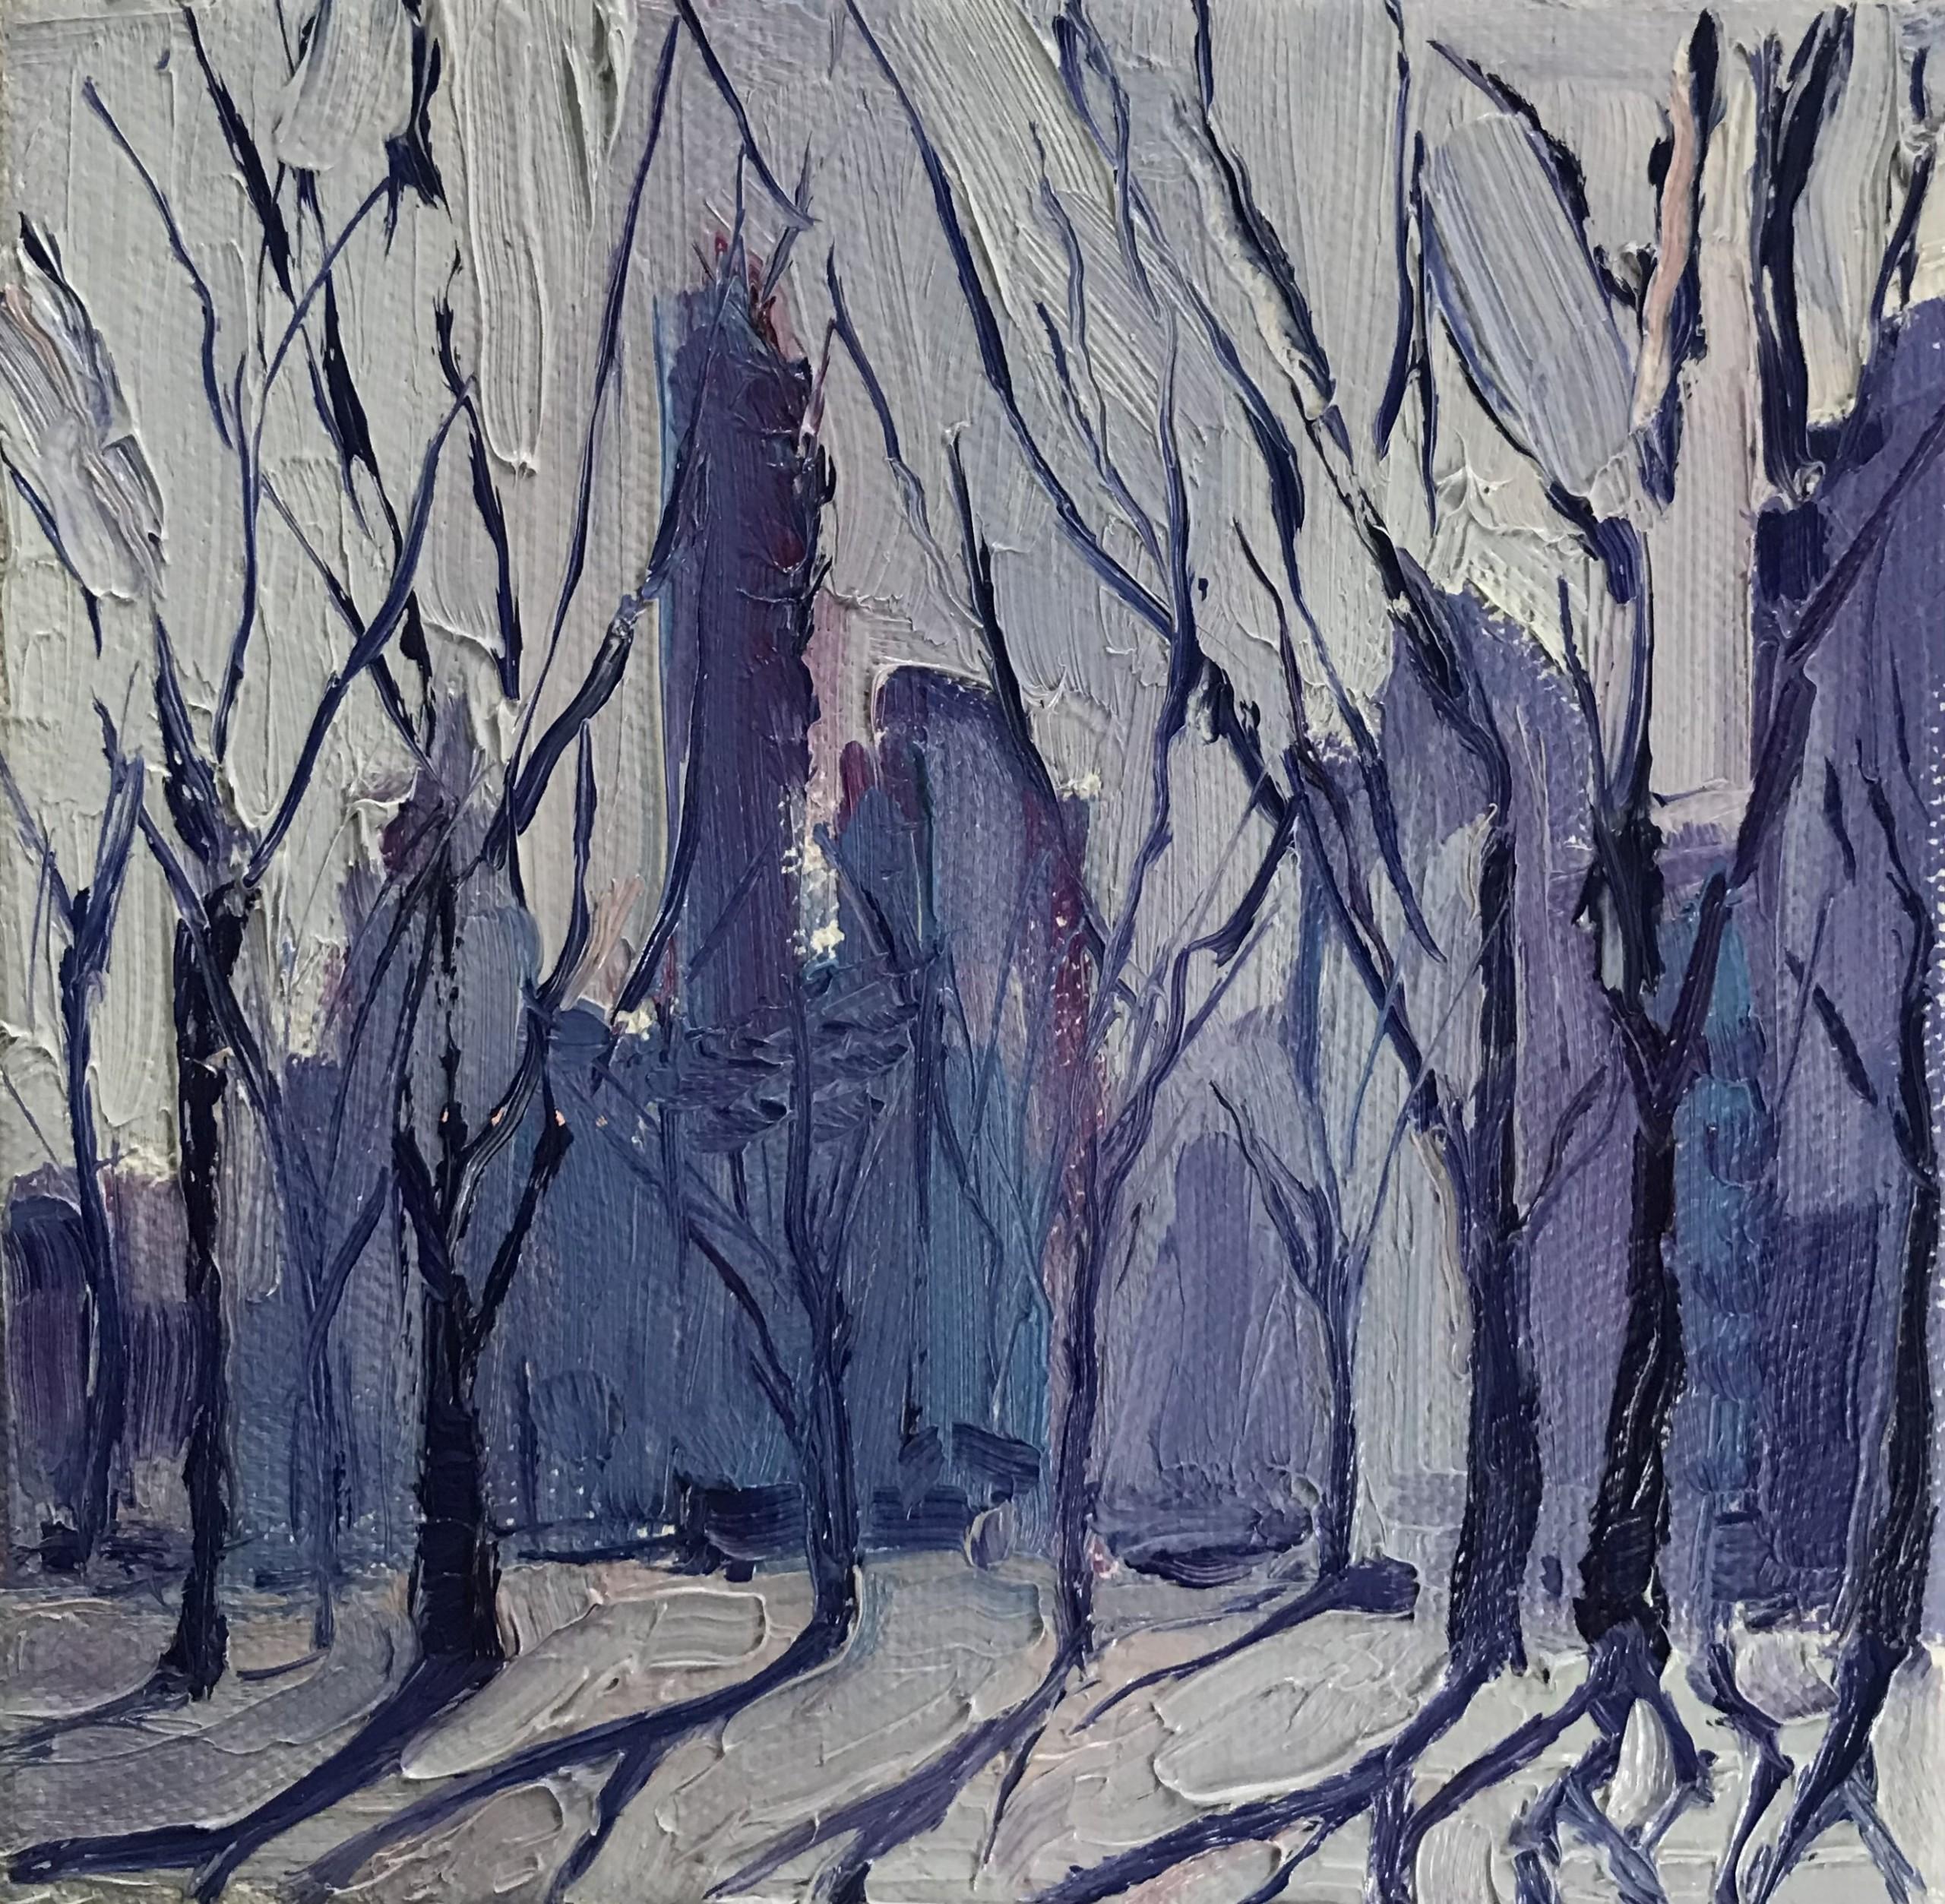 New York Shadows by Eleanor Woolley [2022]

New York Shadows by Eleanor Woolley is an original cityscape painting on canvas. This scene depicts New York's rising buildings through gaps in trees in the purple- blue, dying winter light.

Additional